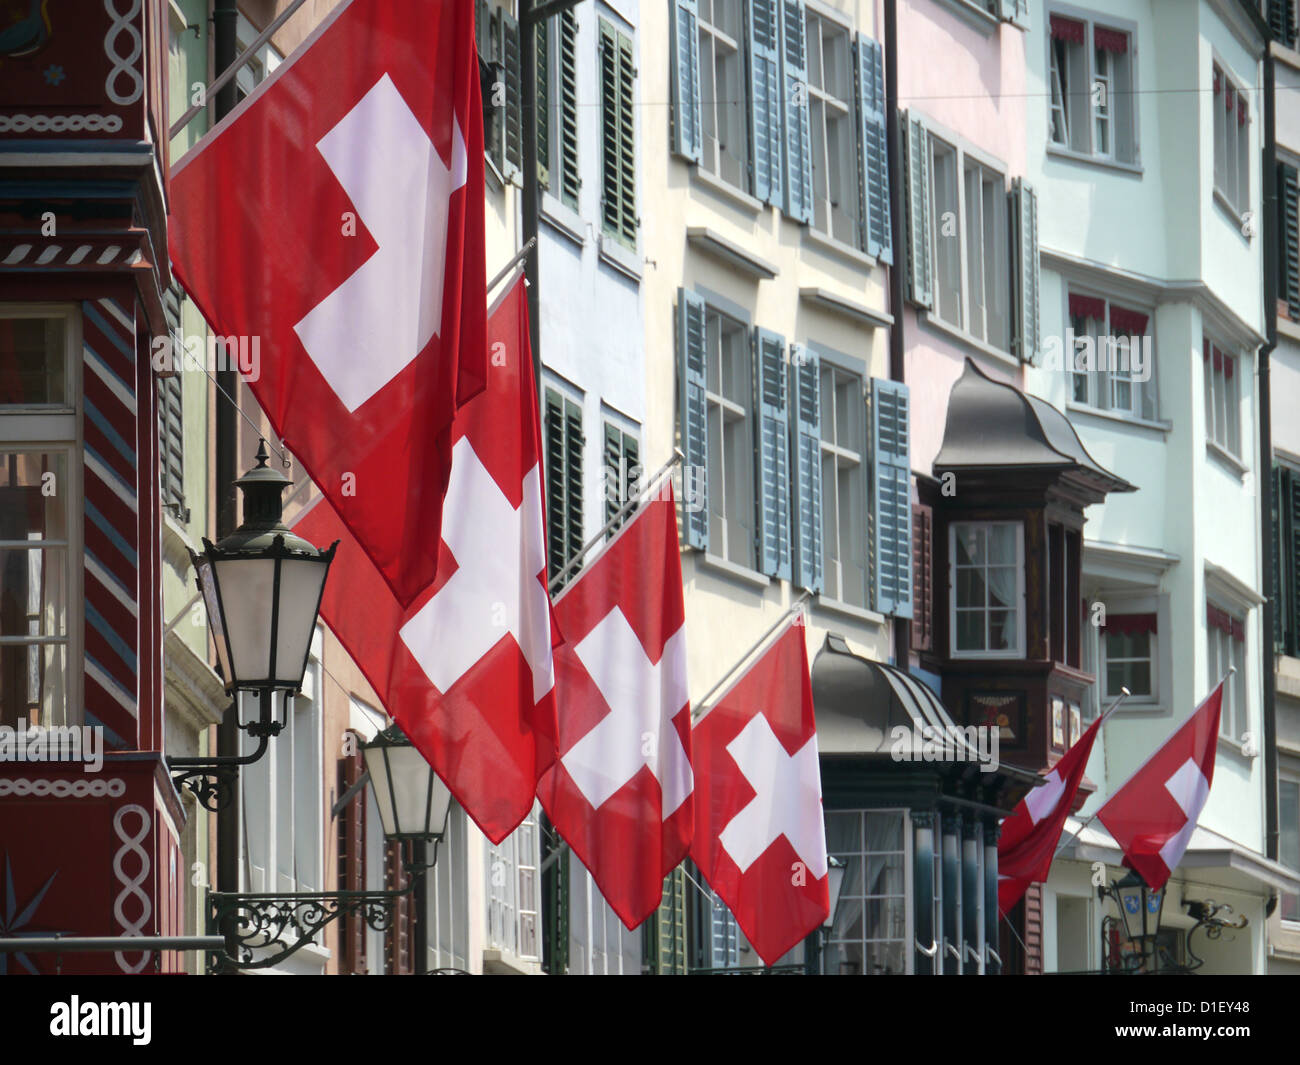 Swiss flags at house walls at national holiday, Zurich, Switzerland Stock Photo